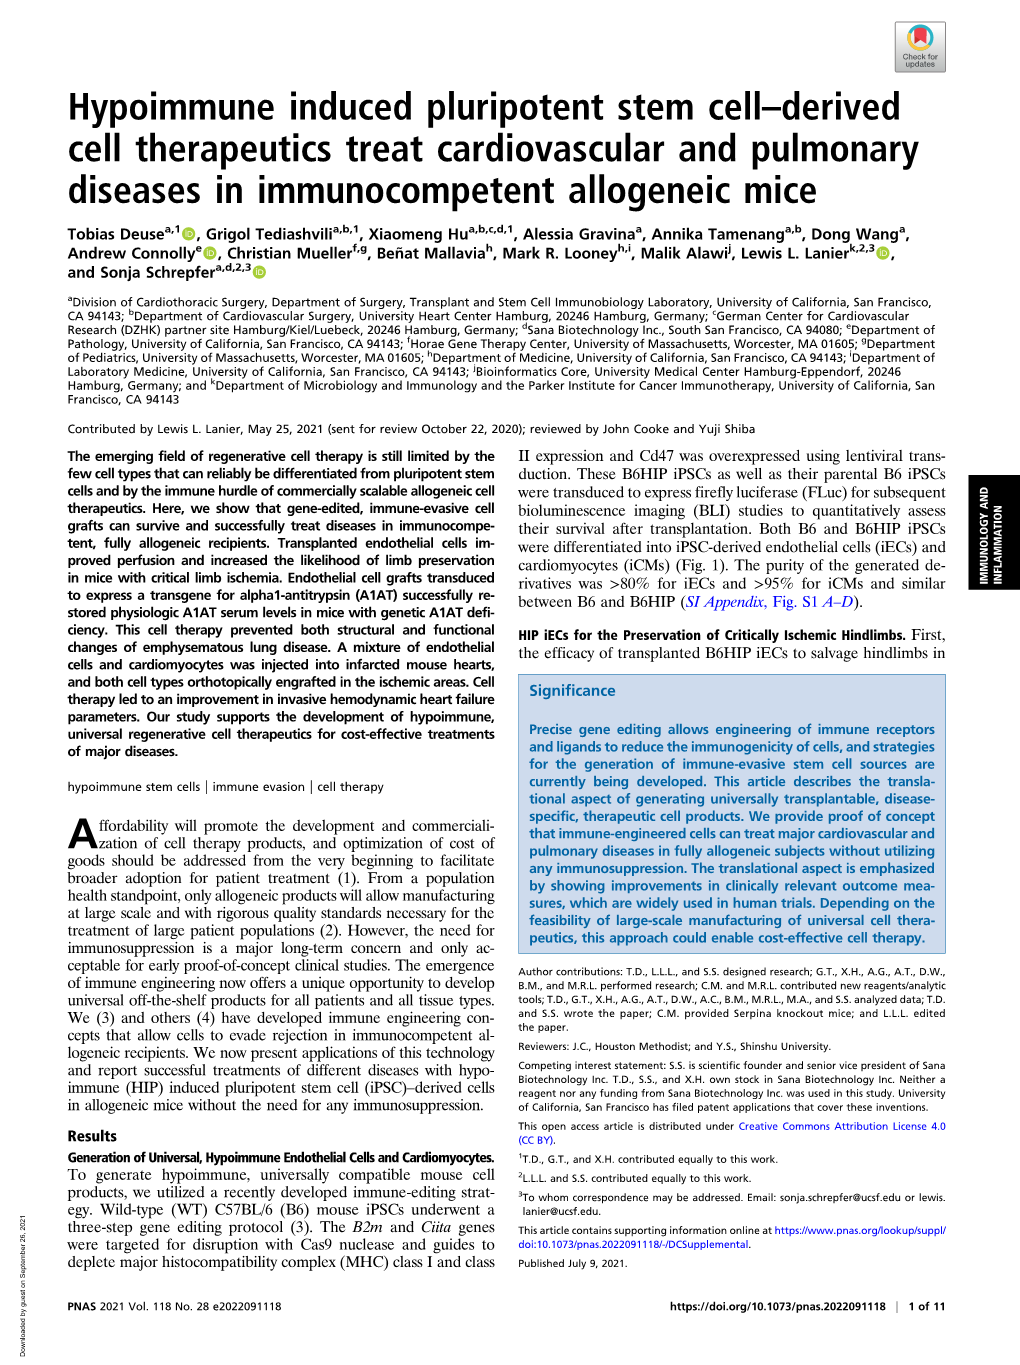 Hypoimmune Induced Pluripotent Stem Cell–Derived Cell Therapeutics Treat Cardiovascular and Pulmonary Diseases in Immunocompetent Allogeneic Mice